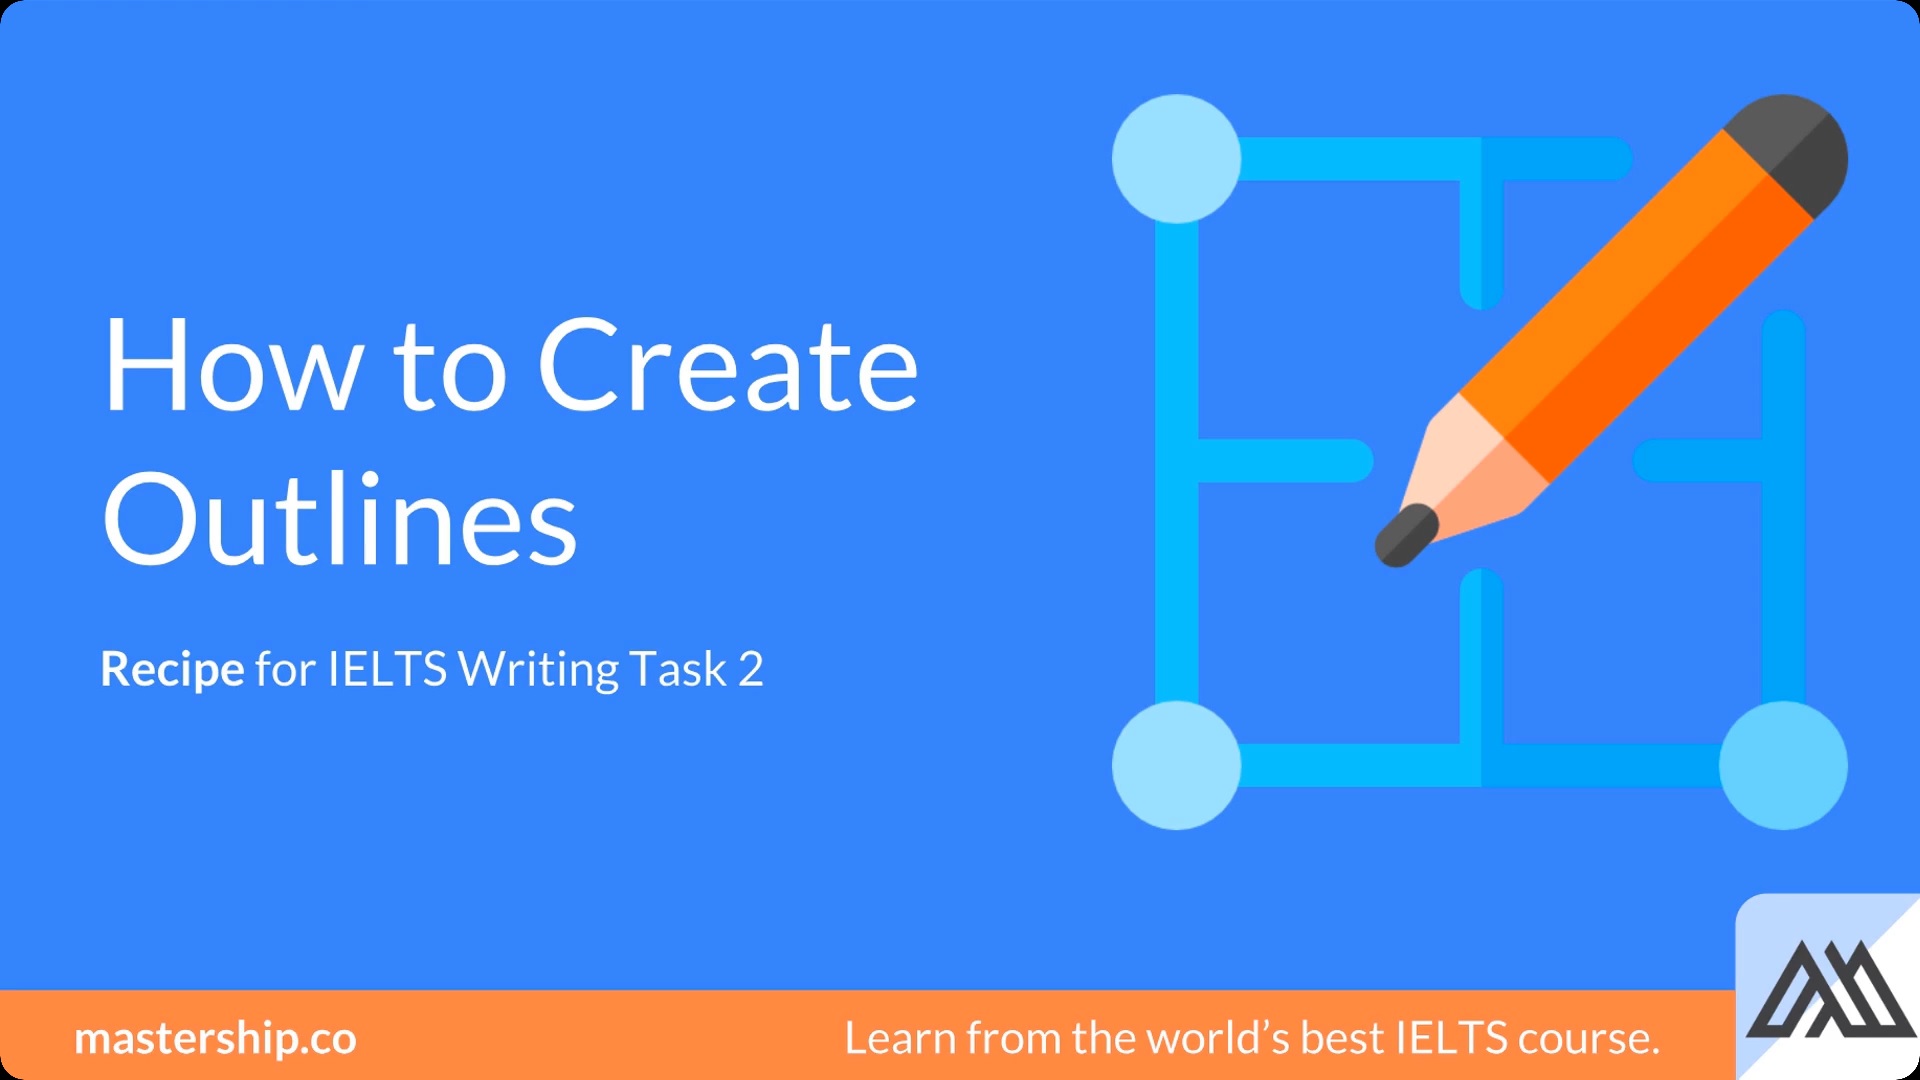 How to Create Outlines in IELTS Writing task 2